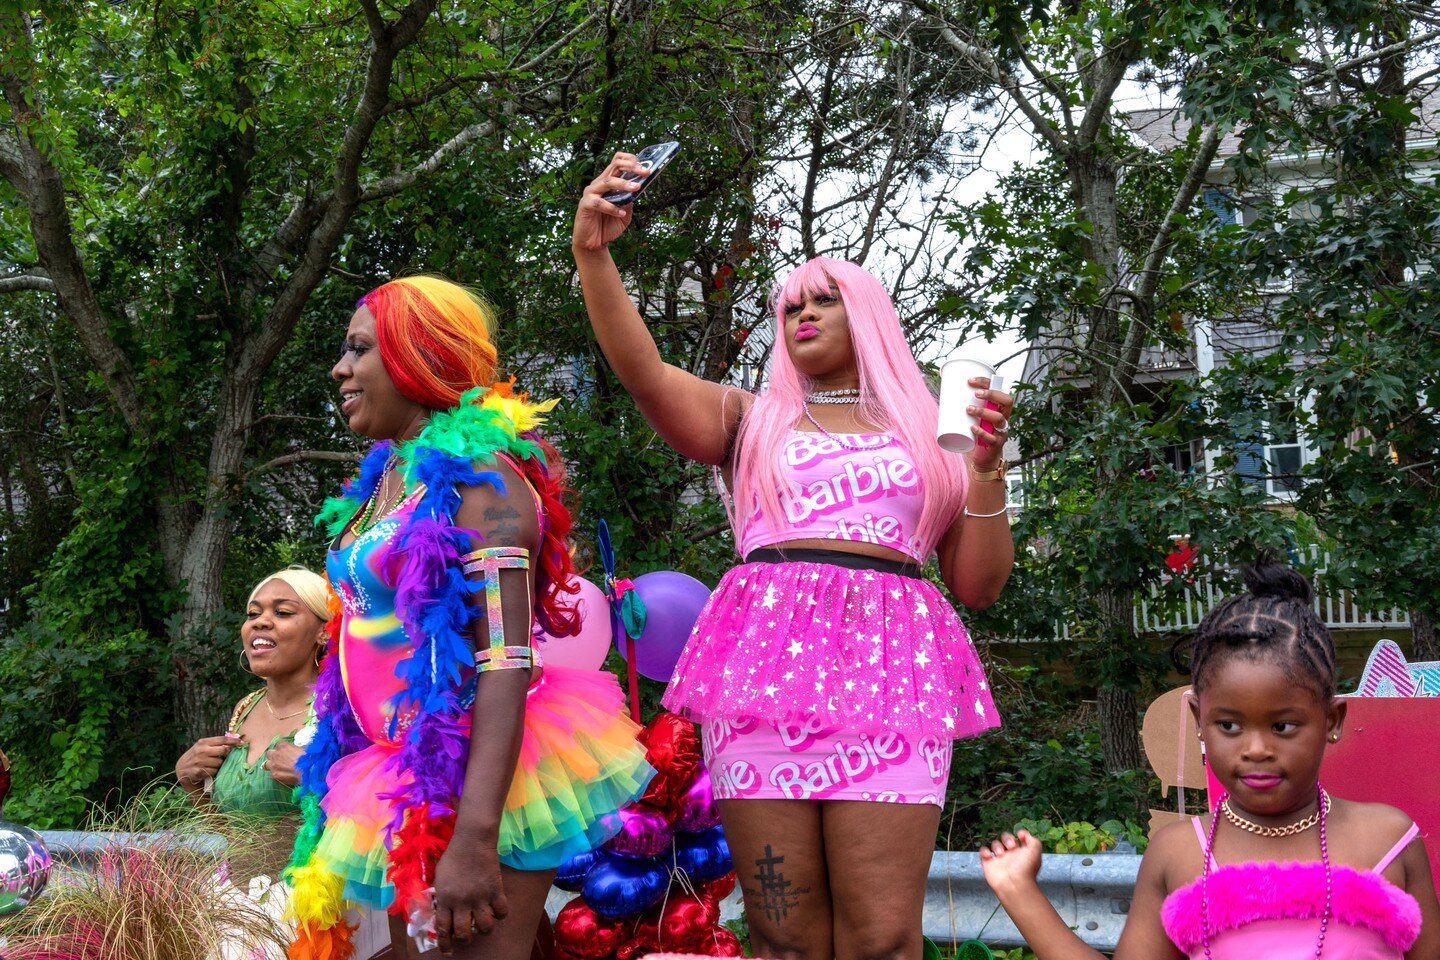 #family #FlowerBedLandscaping #paradefloat #ProvincetownCarnival #ProvincetownParade #Queen #Barbie #LandofToys #barbielimitededition #costumes #pinkhair #pink #inthepink 
#seeingpink #Boston #documentaryphotography #socialdocumentaryphotography 
#Bo